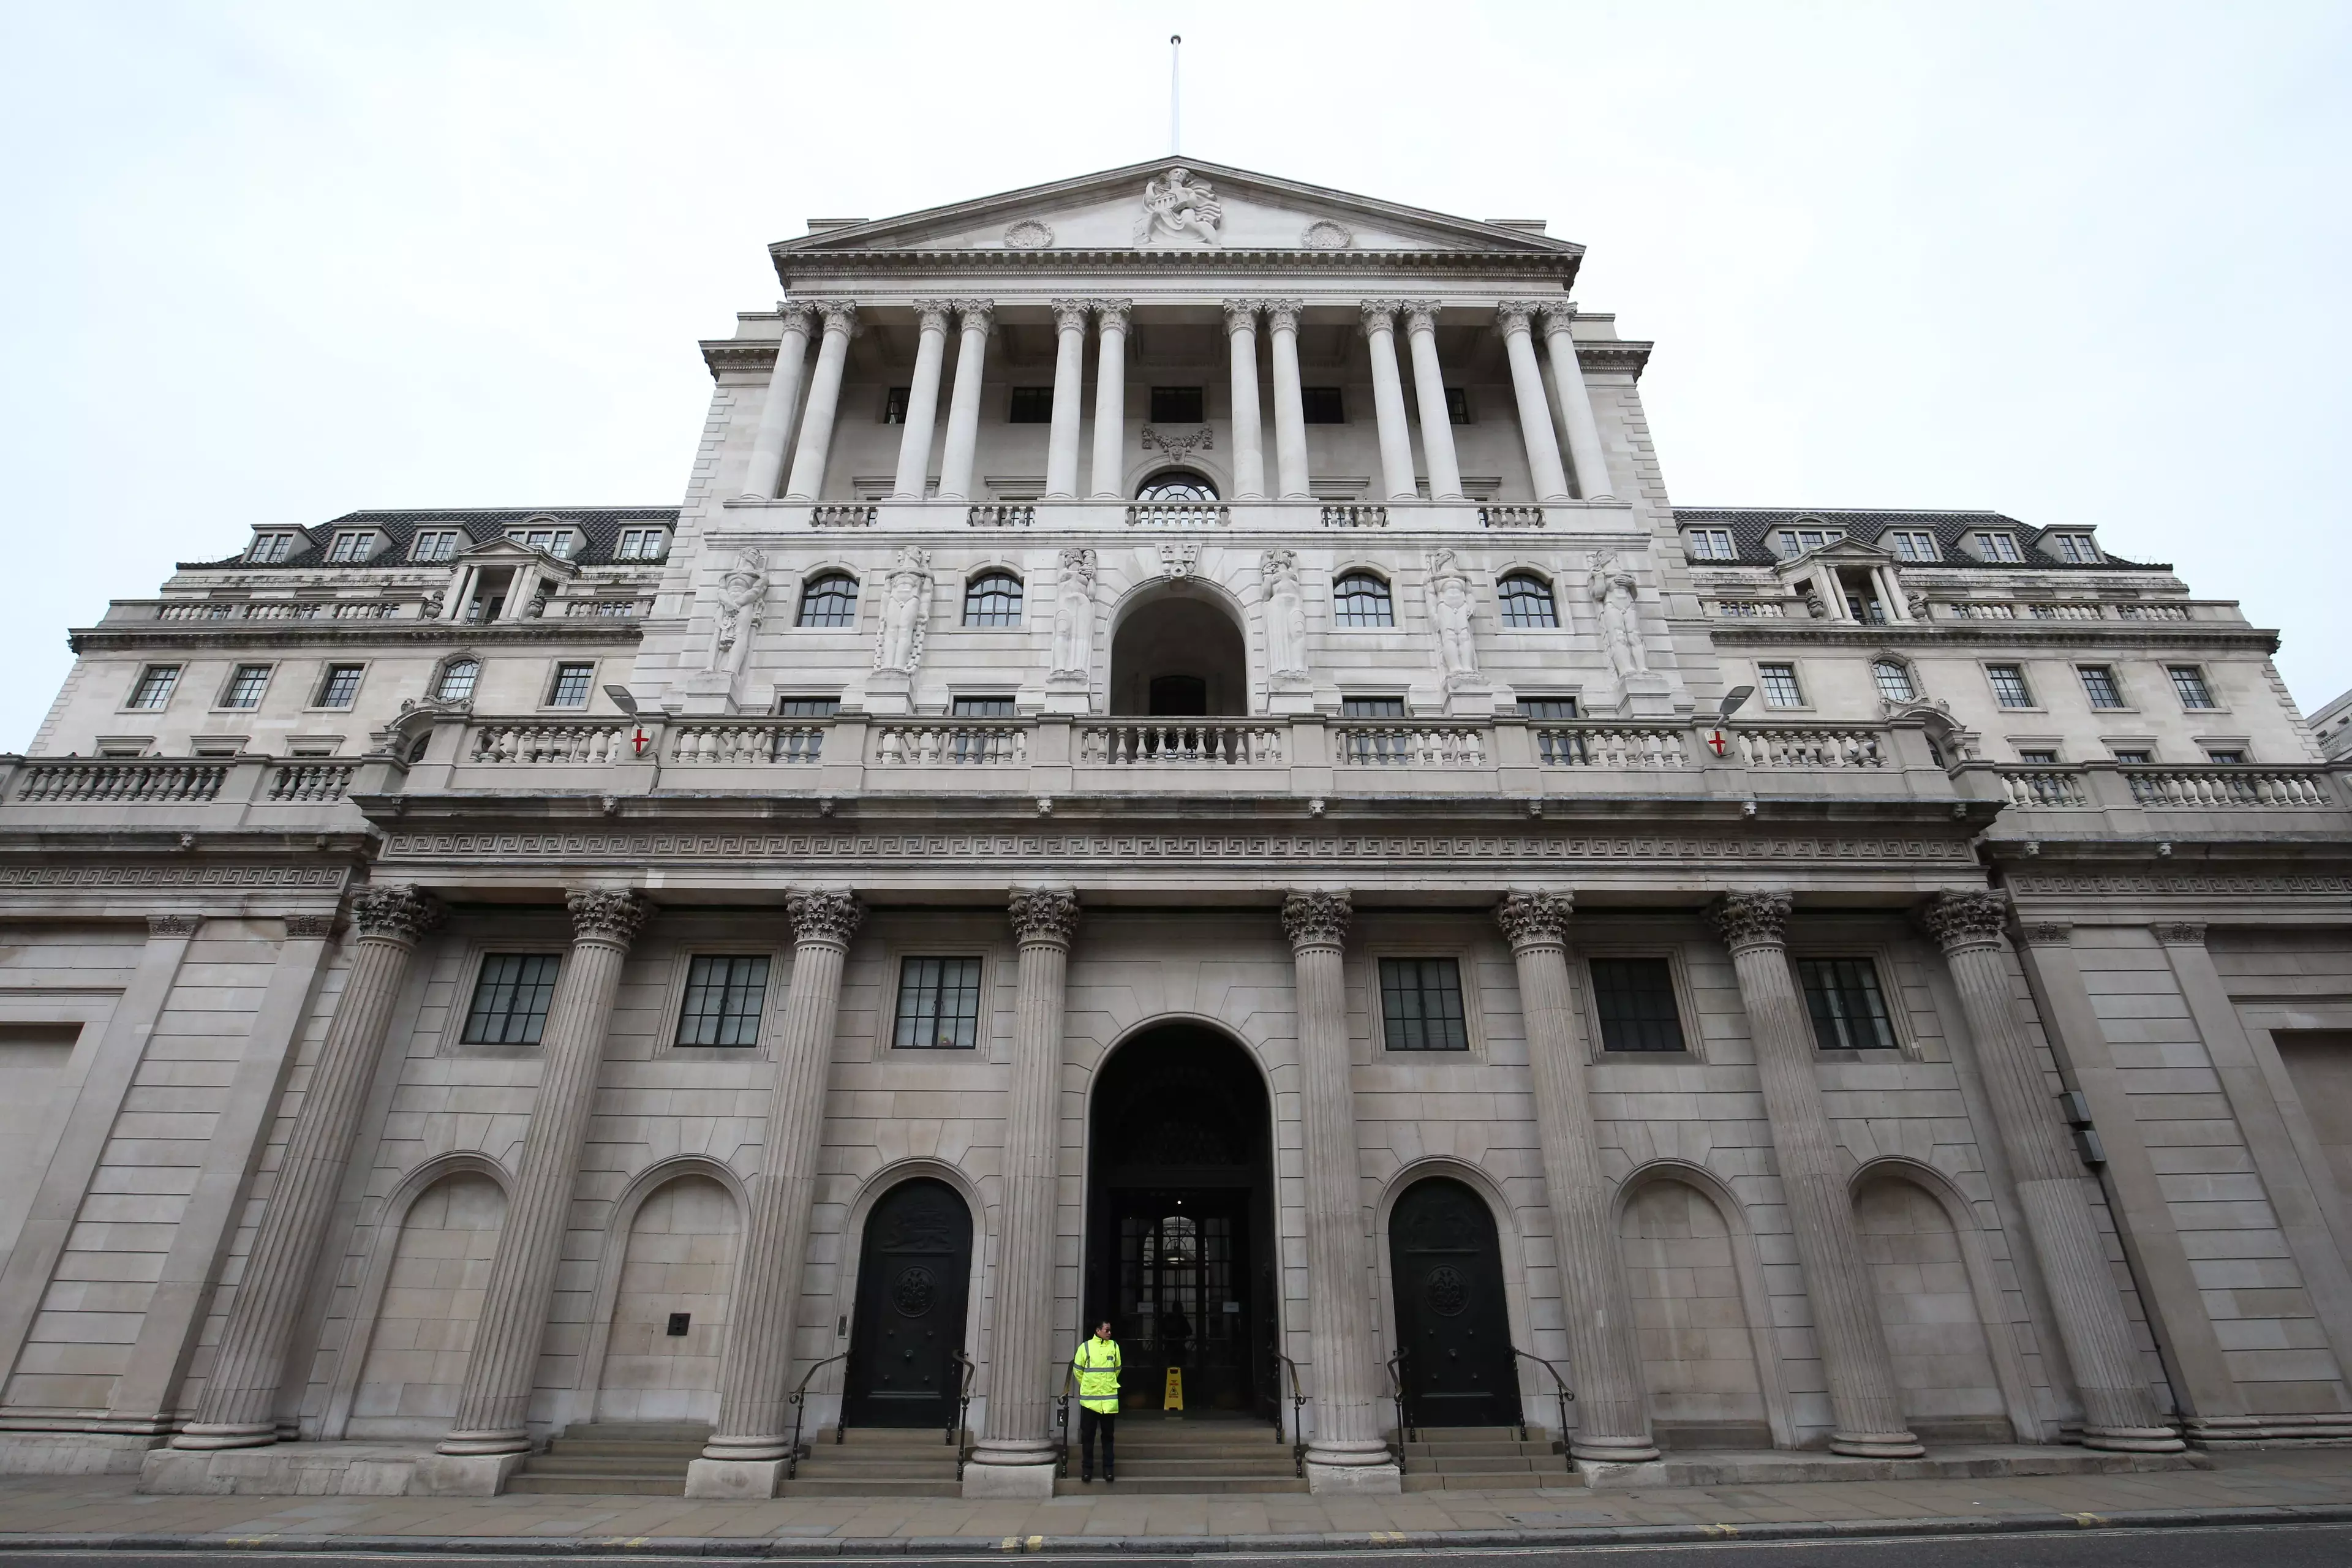 The Bank of England has predicted a devastating economic downturn.